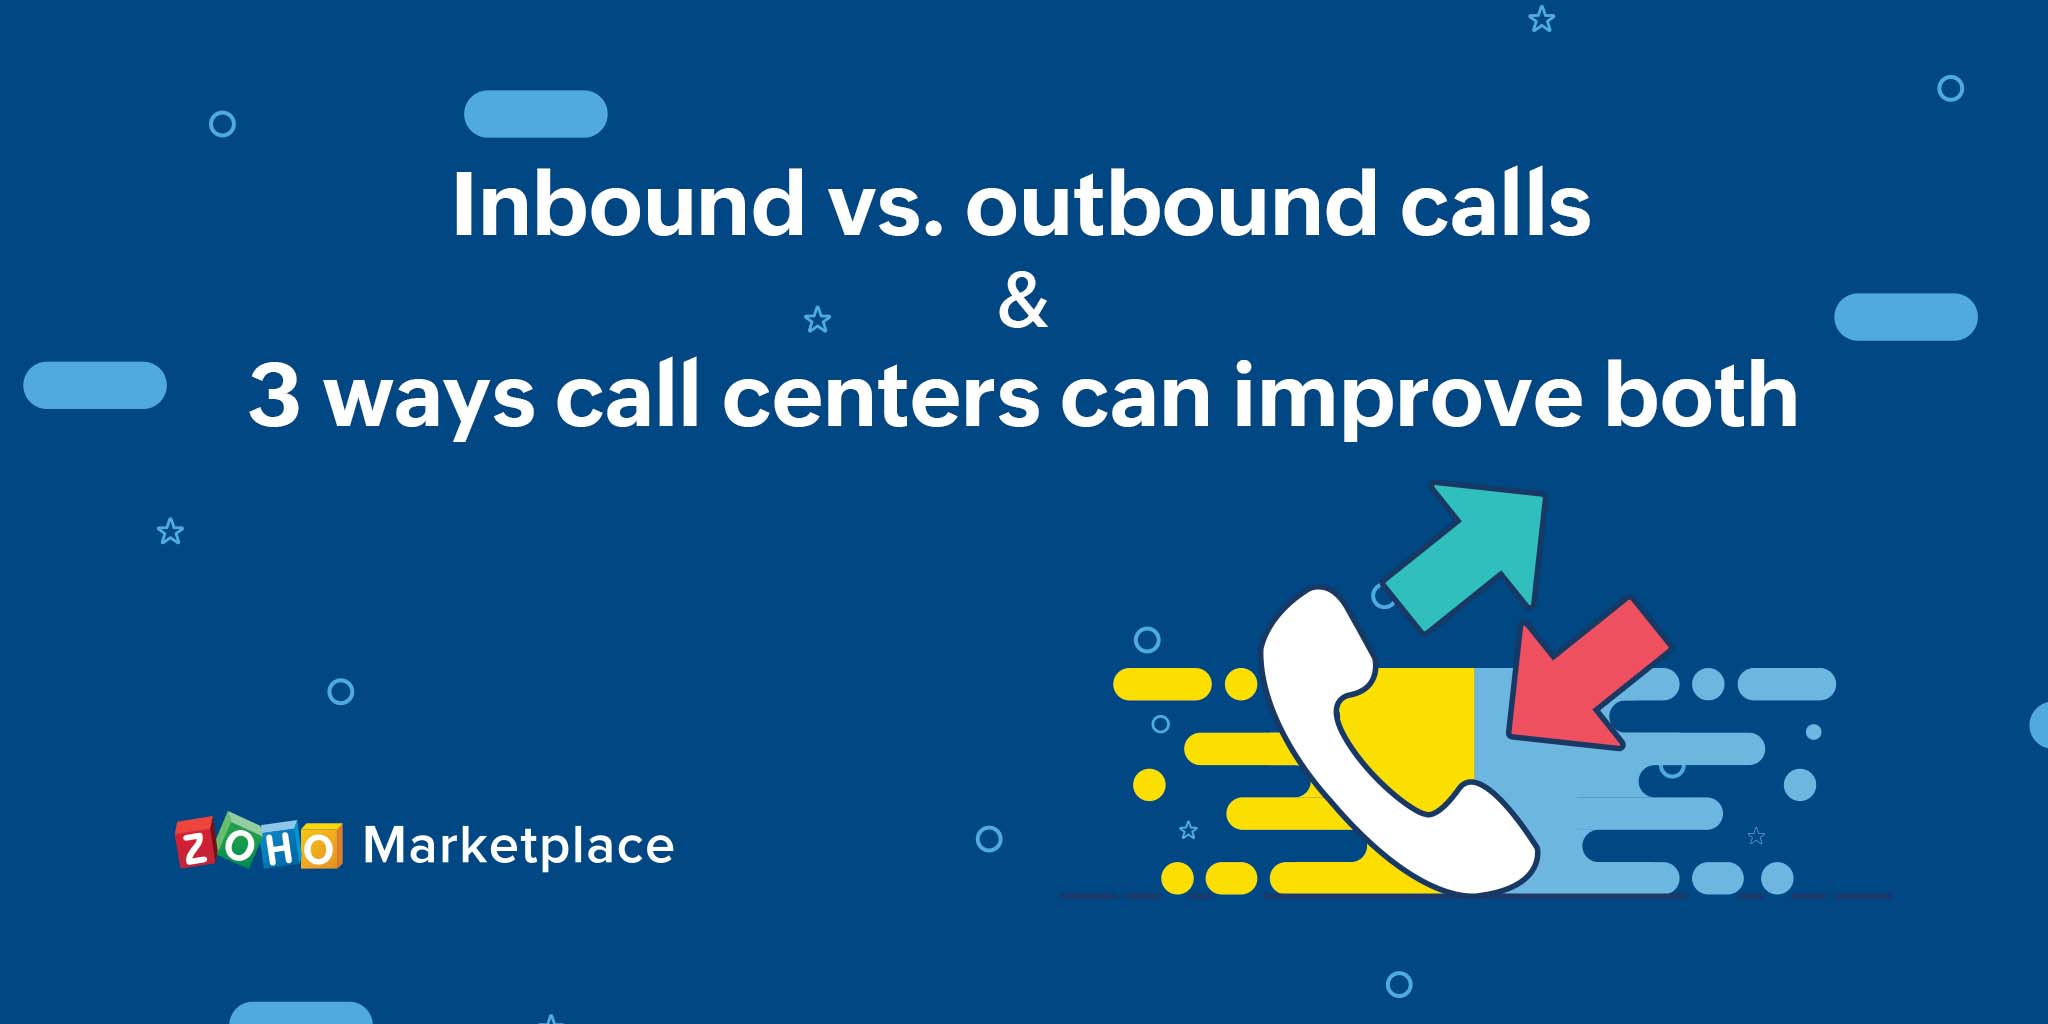 Inbound vs. outbound calls & 3 ways call centers can improve both